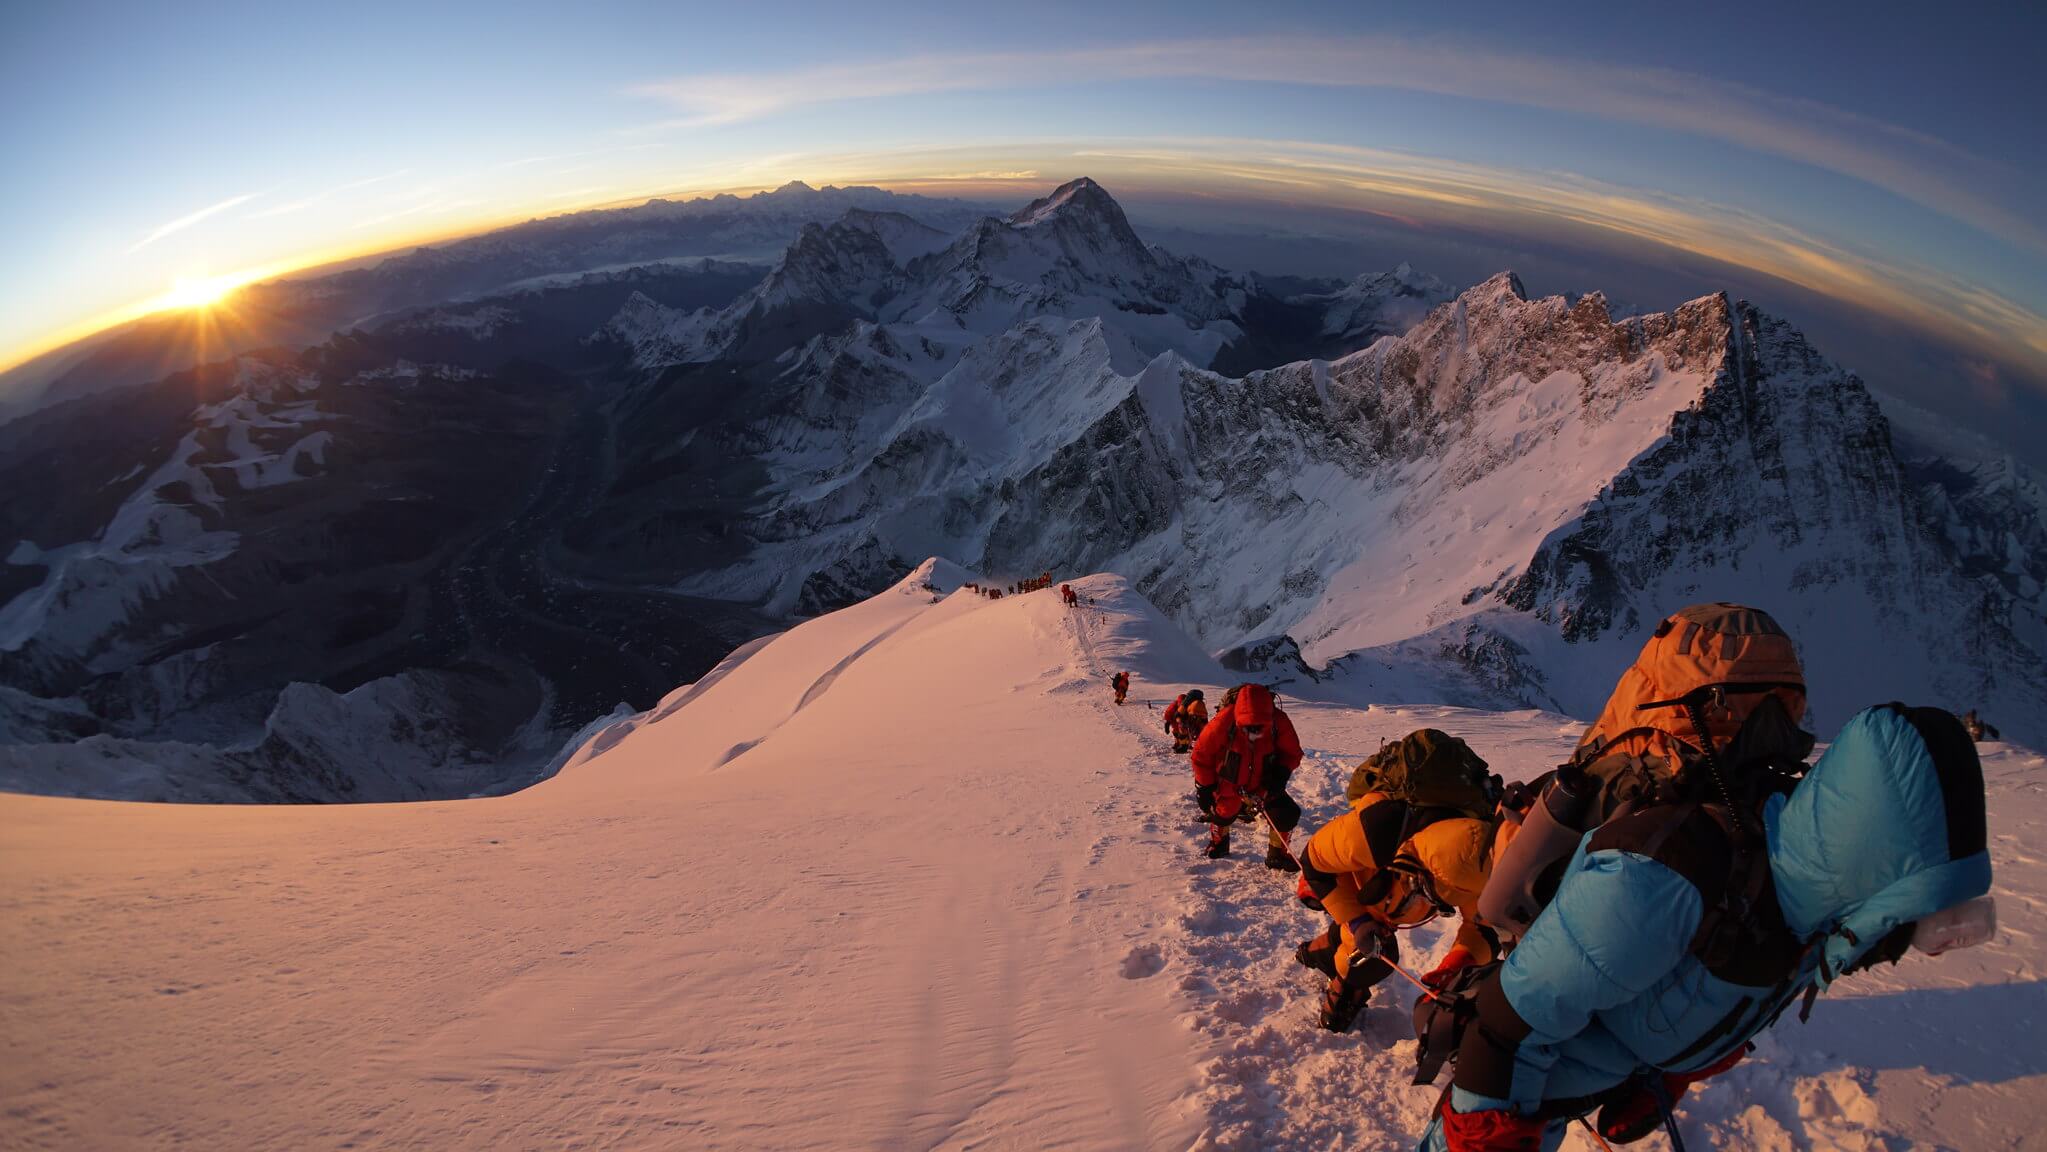 A long line of hikers attempting to summit Mount Everest